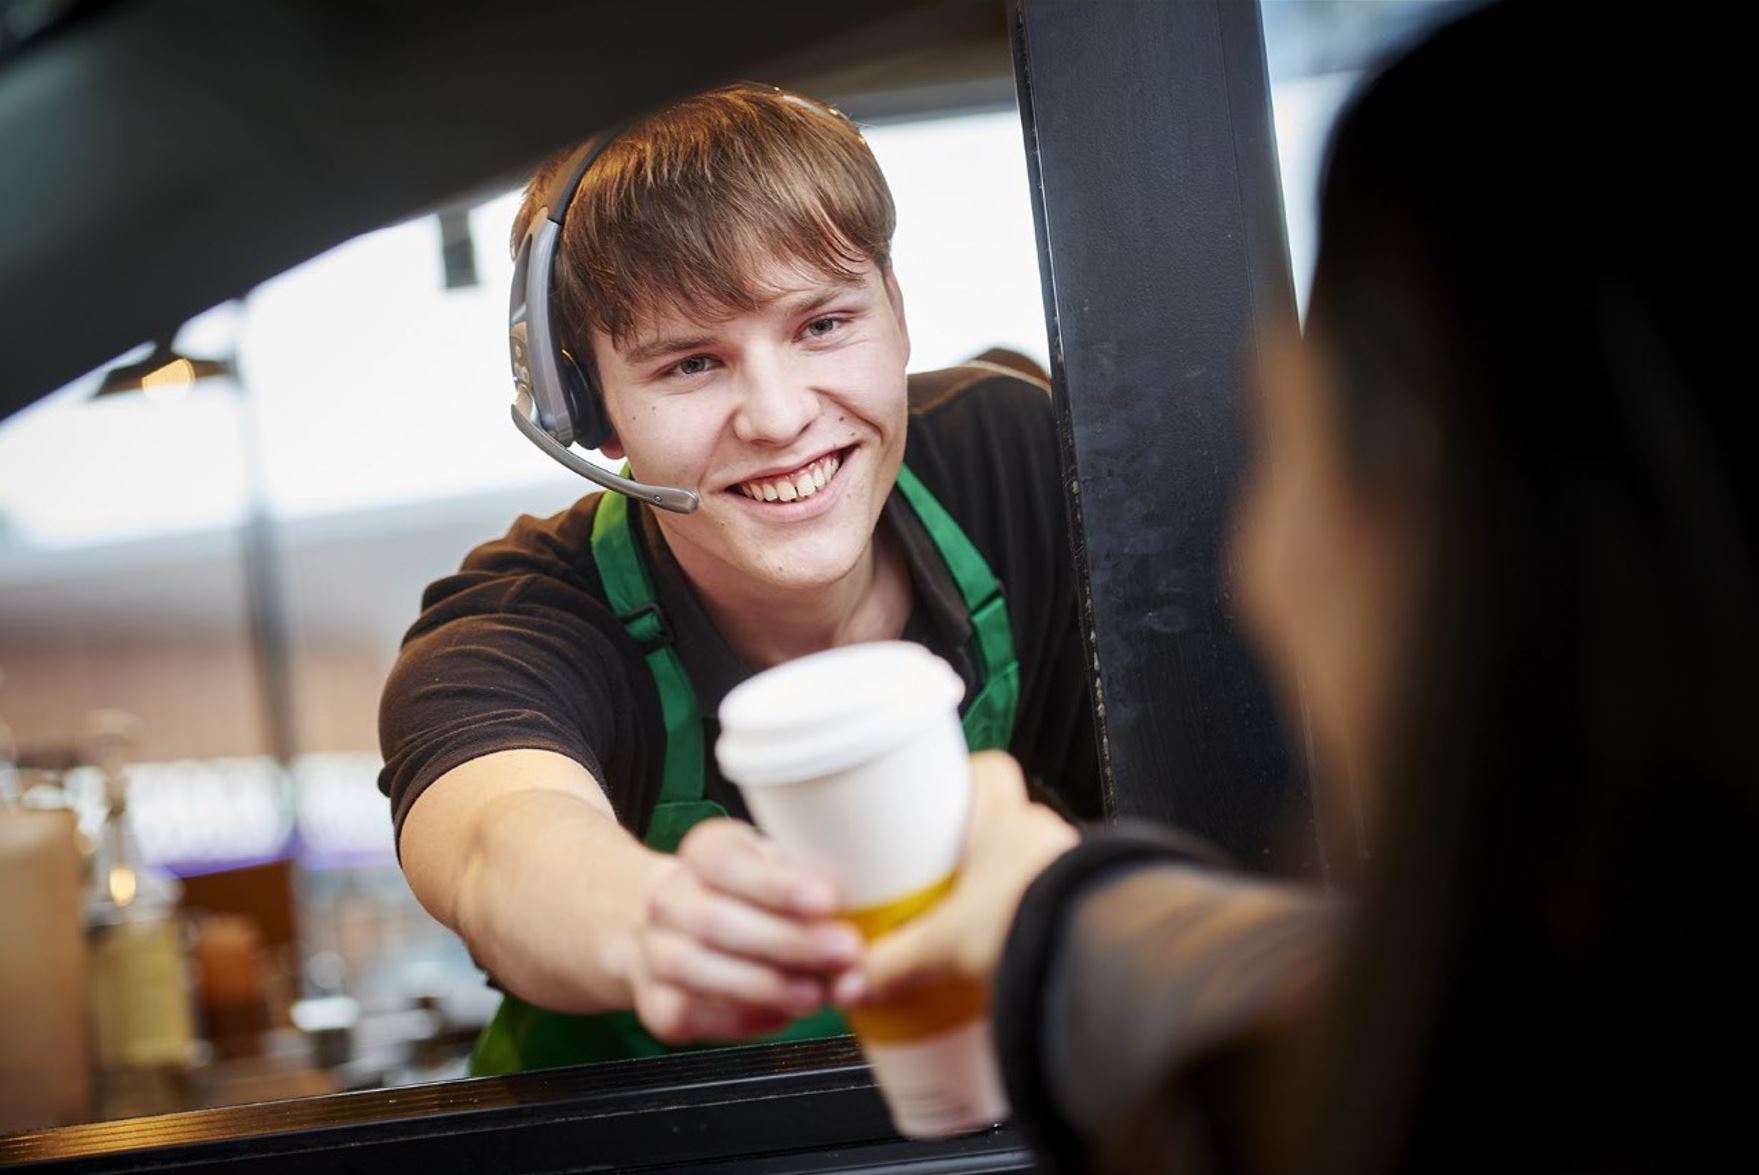 Barista at Welcome Break smiles and hands a coffee to a driver at a drive-through